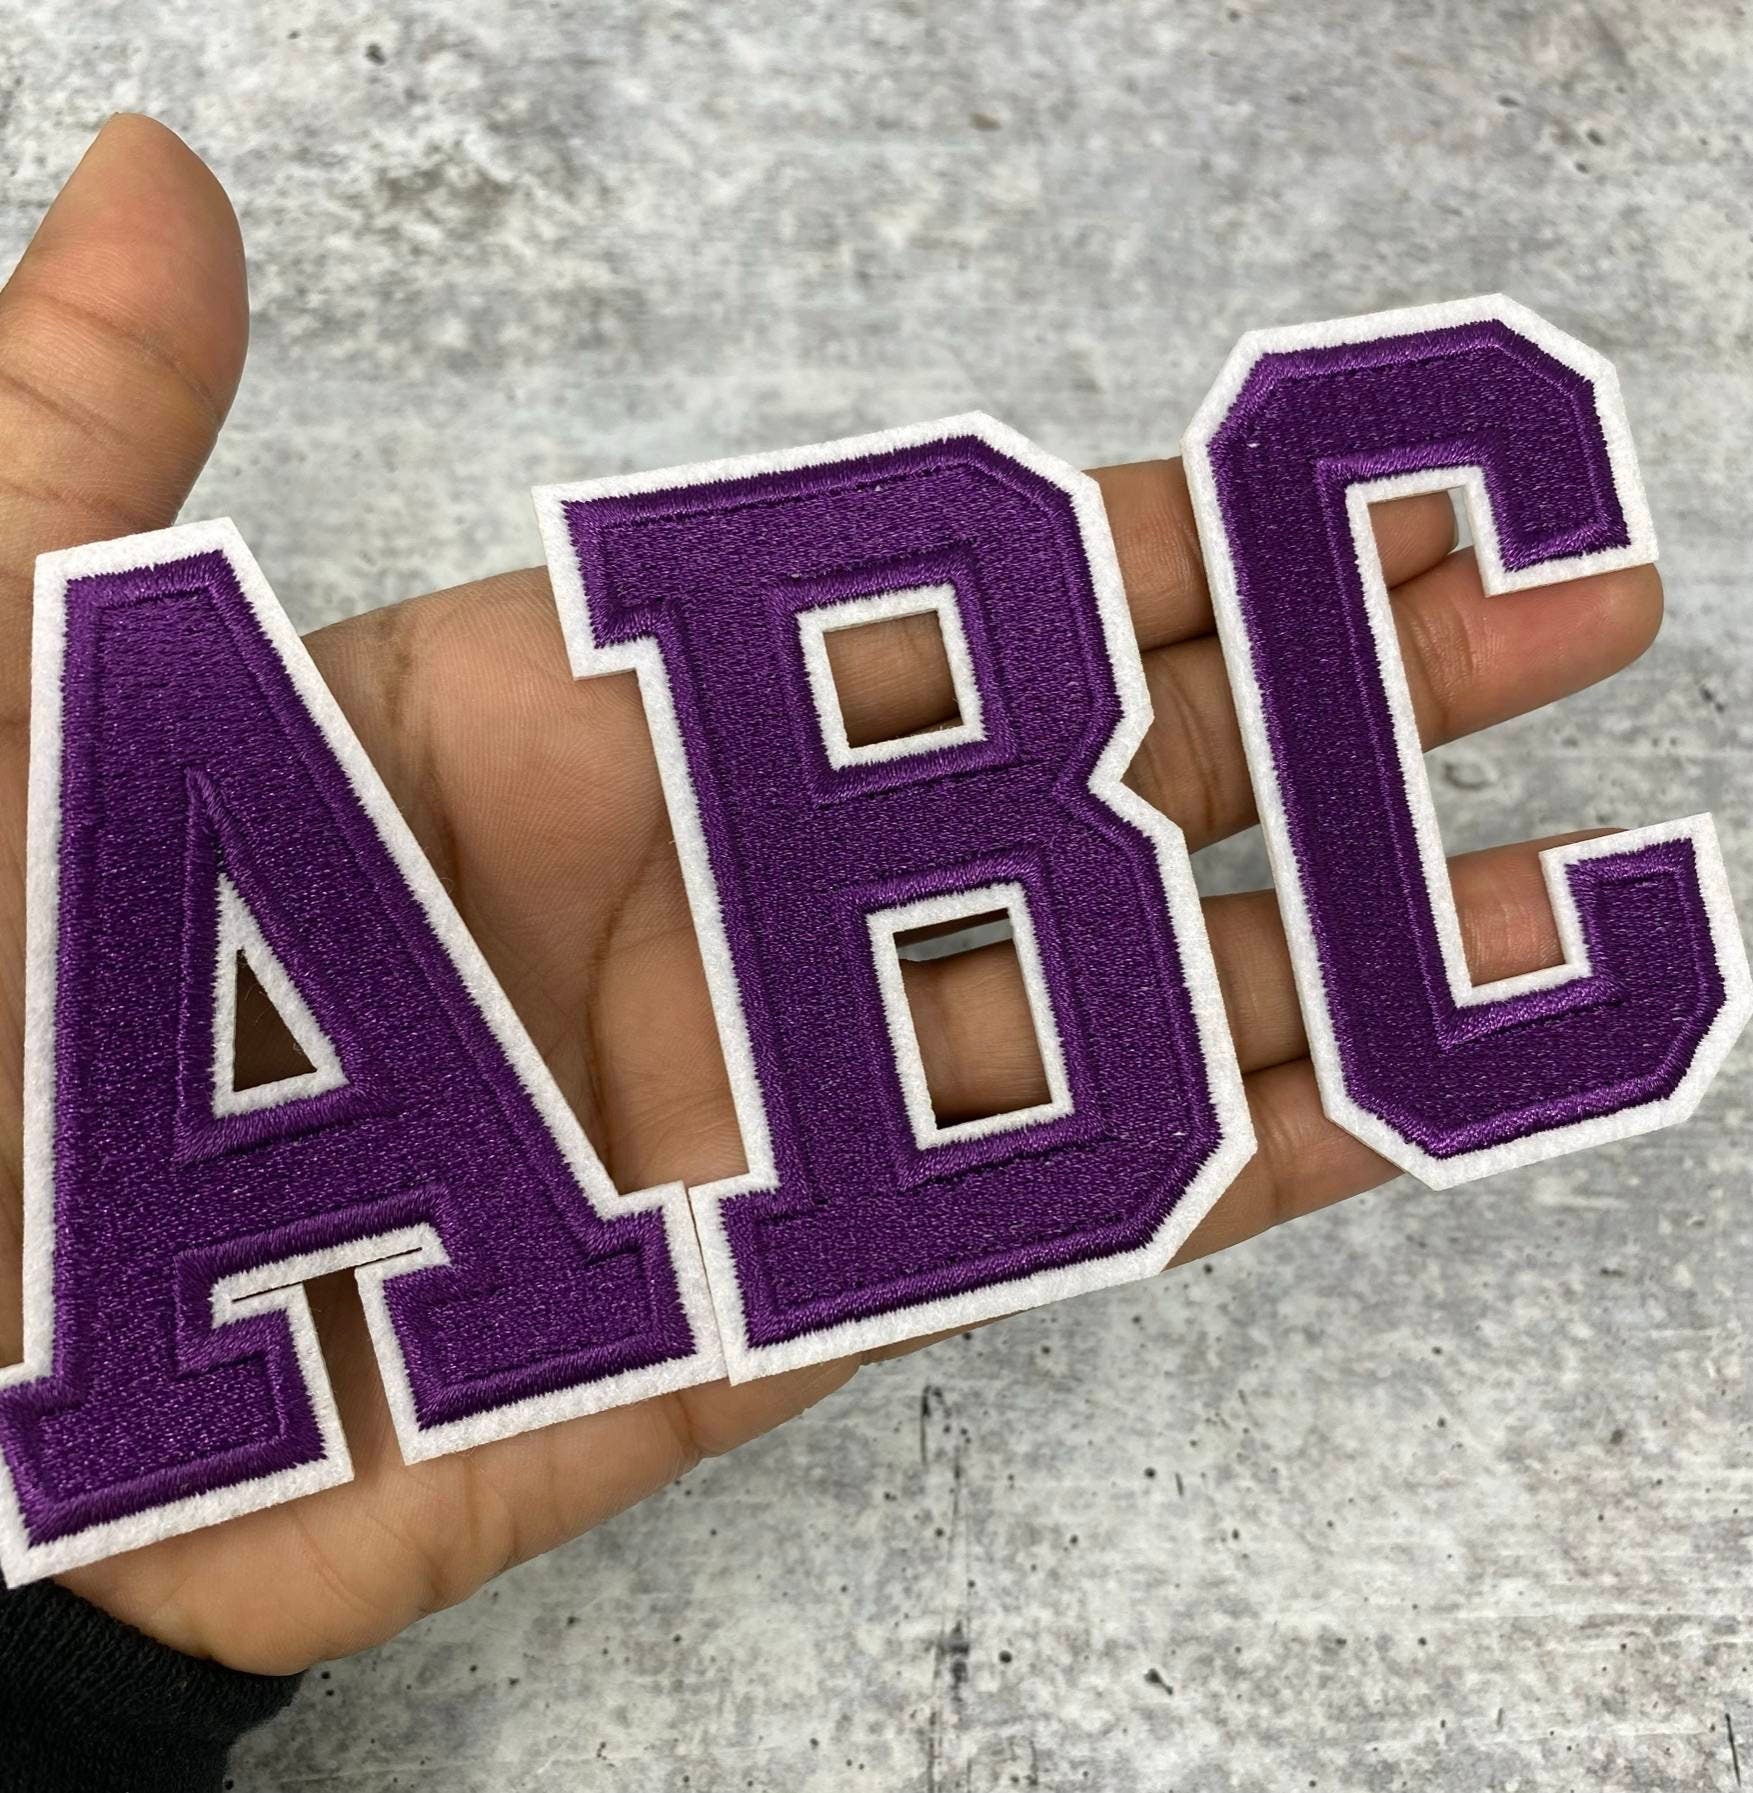 3 Embroidered Iron-On Letter Patches, Alphabet Appliques, Letter Patches  for Clothing, DIY Craft - Purple/White